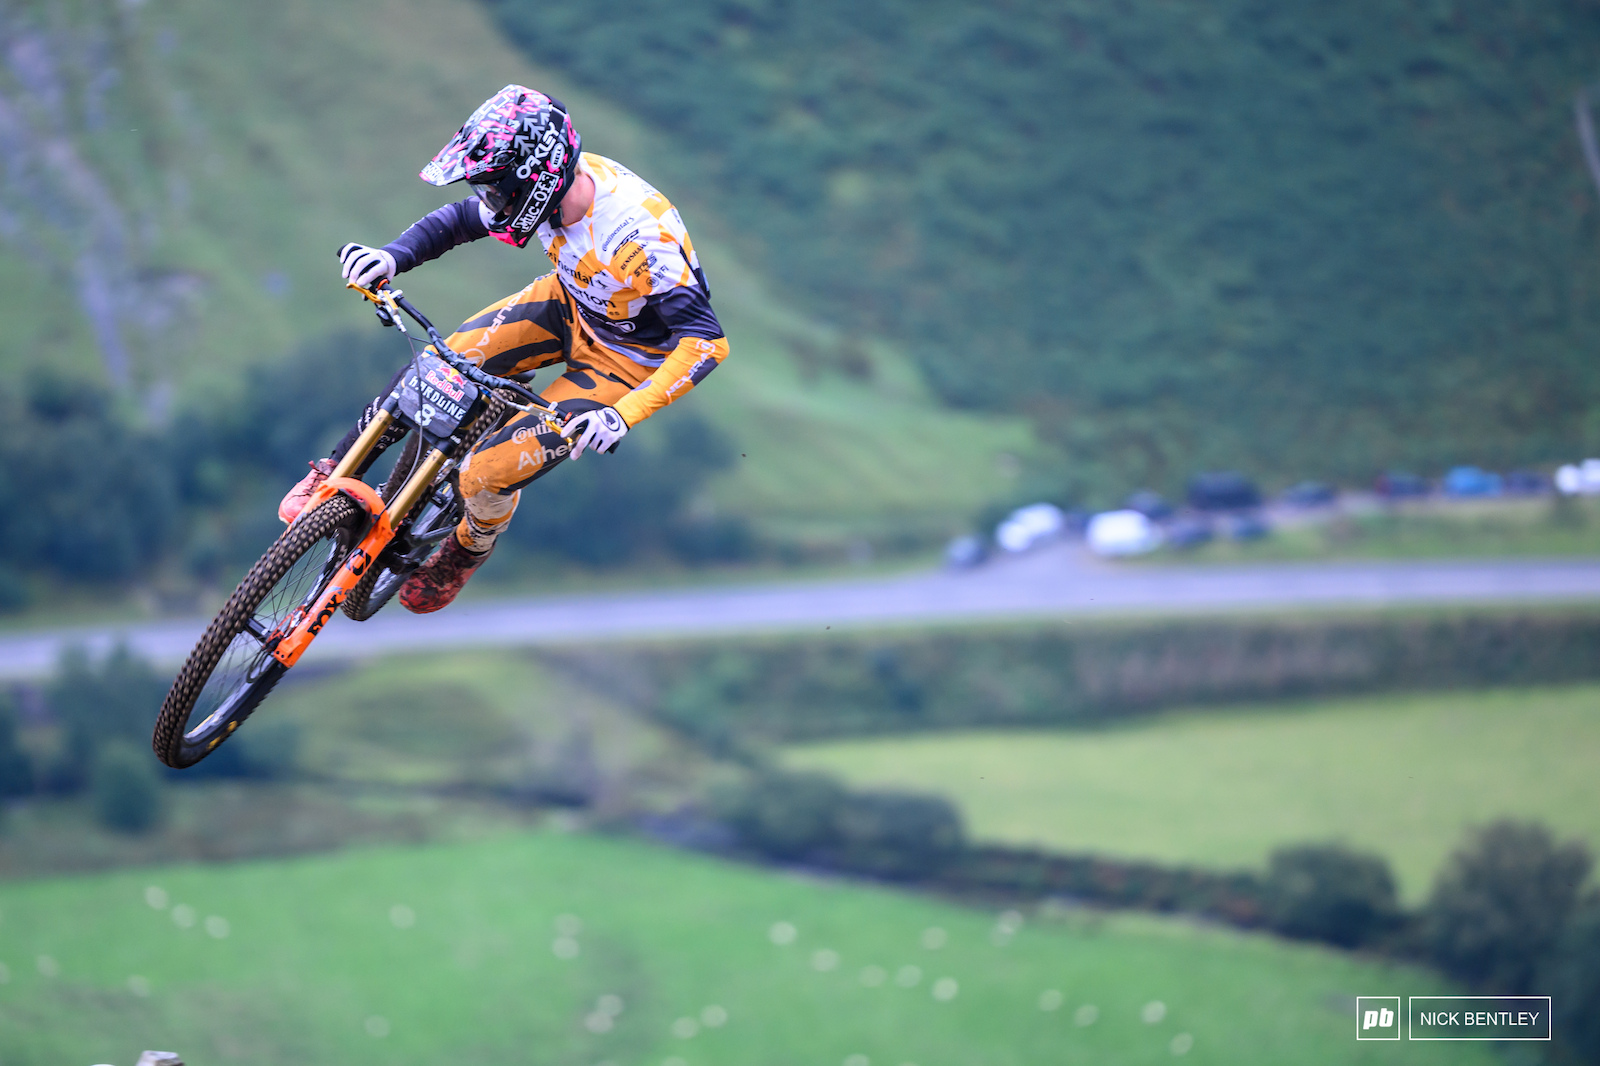 Jim Monro has an unnatural ability to send huge whips off narrow metal slopes